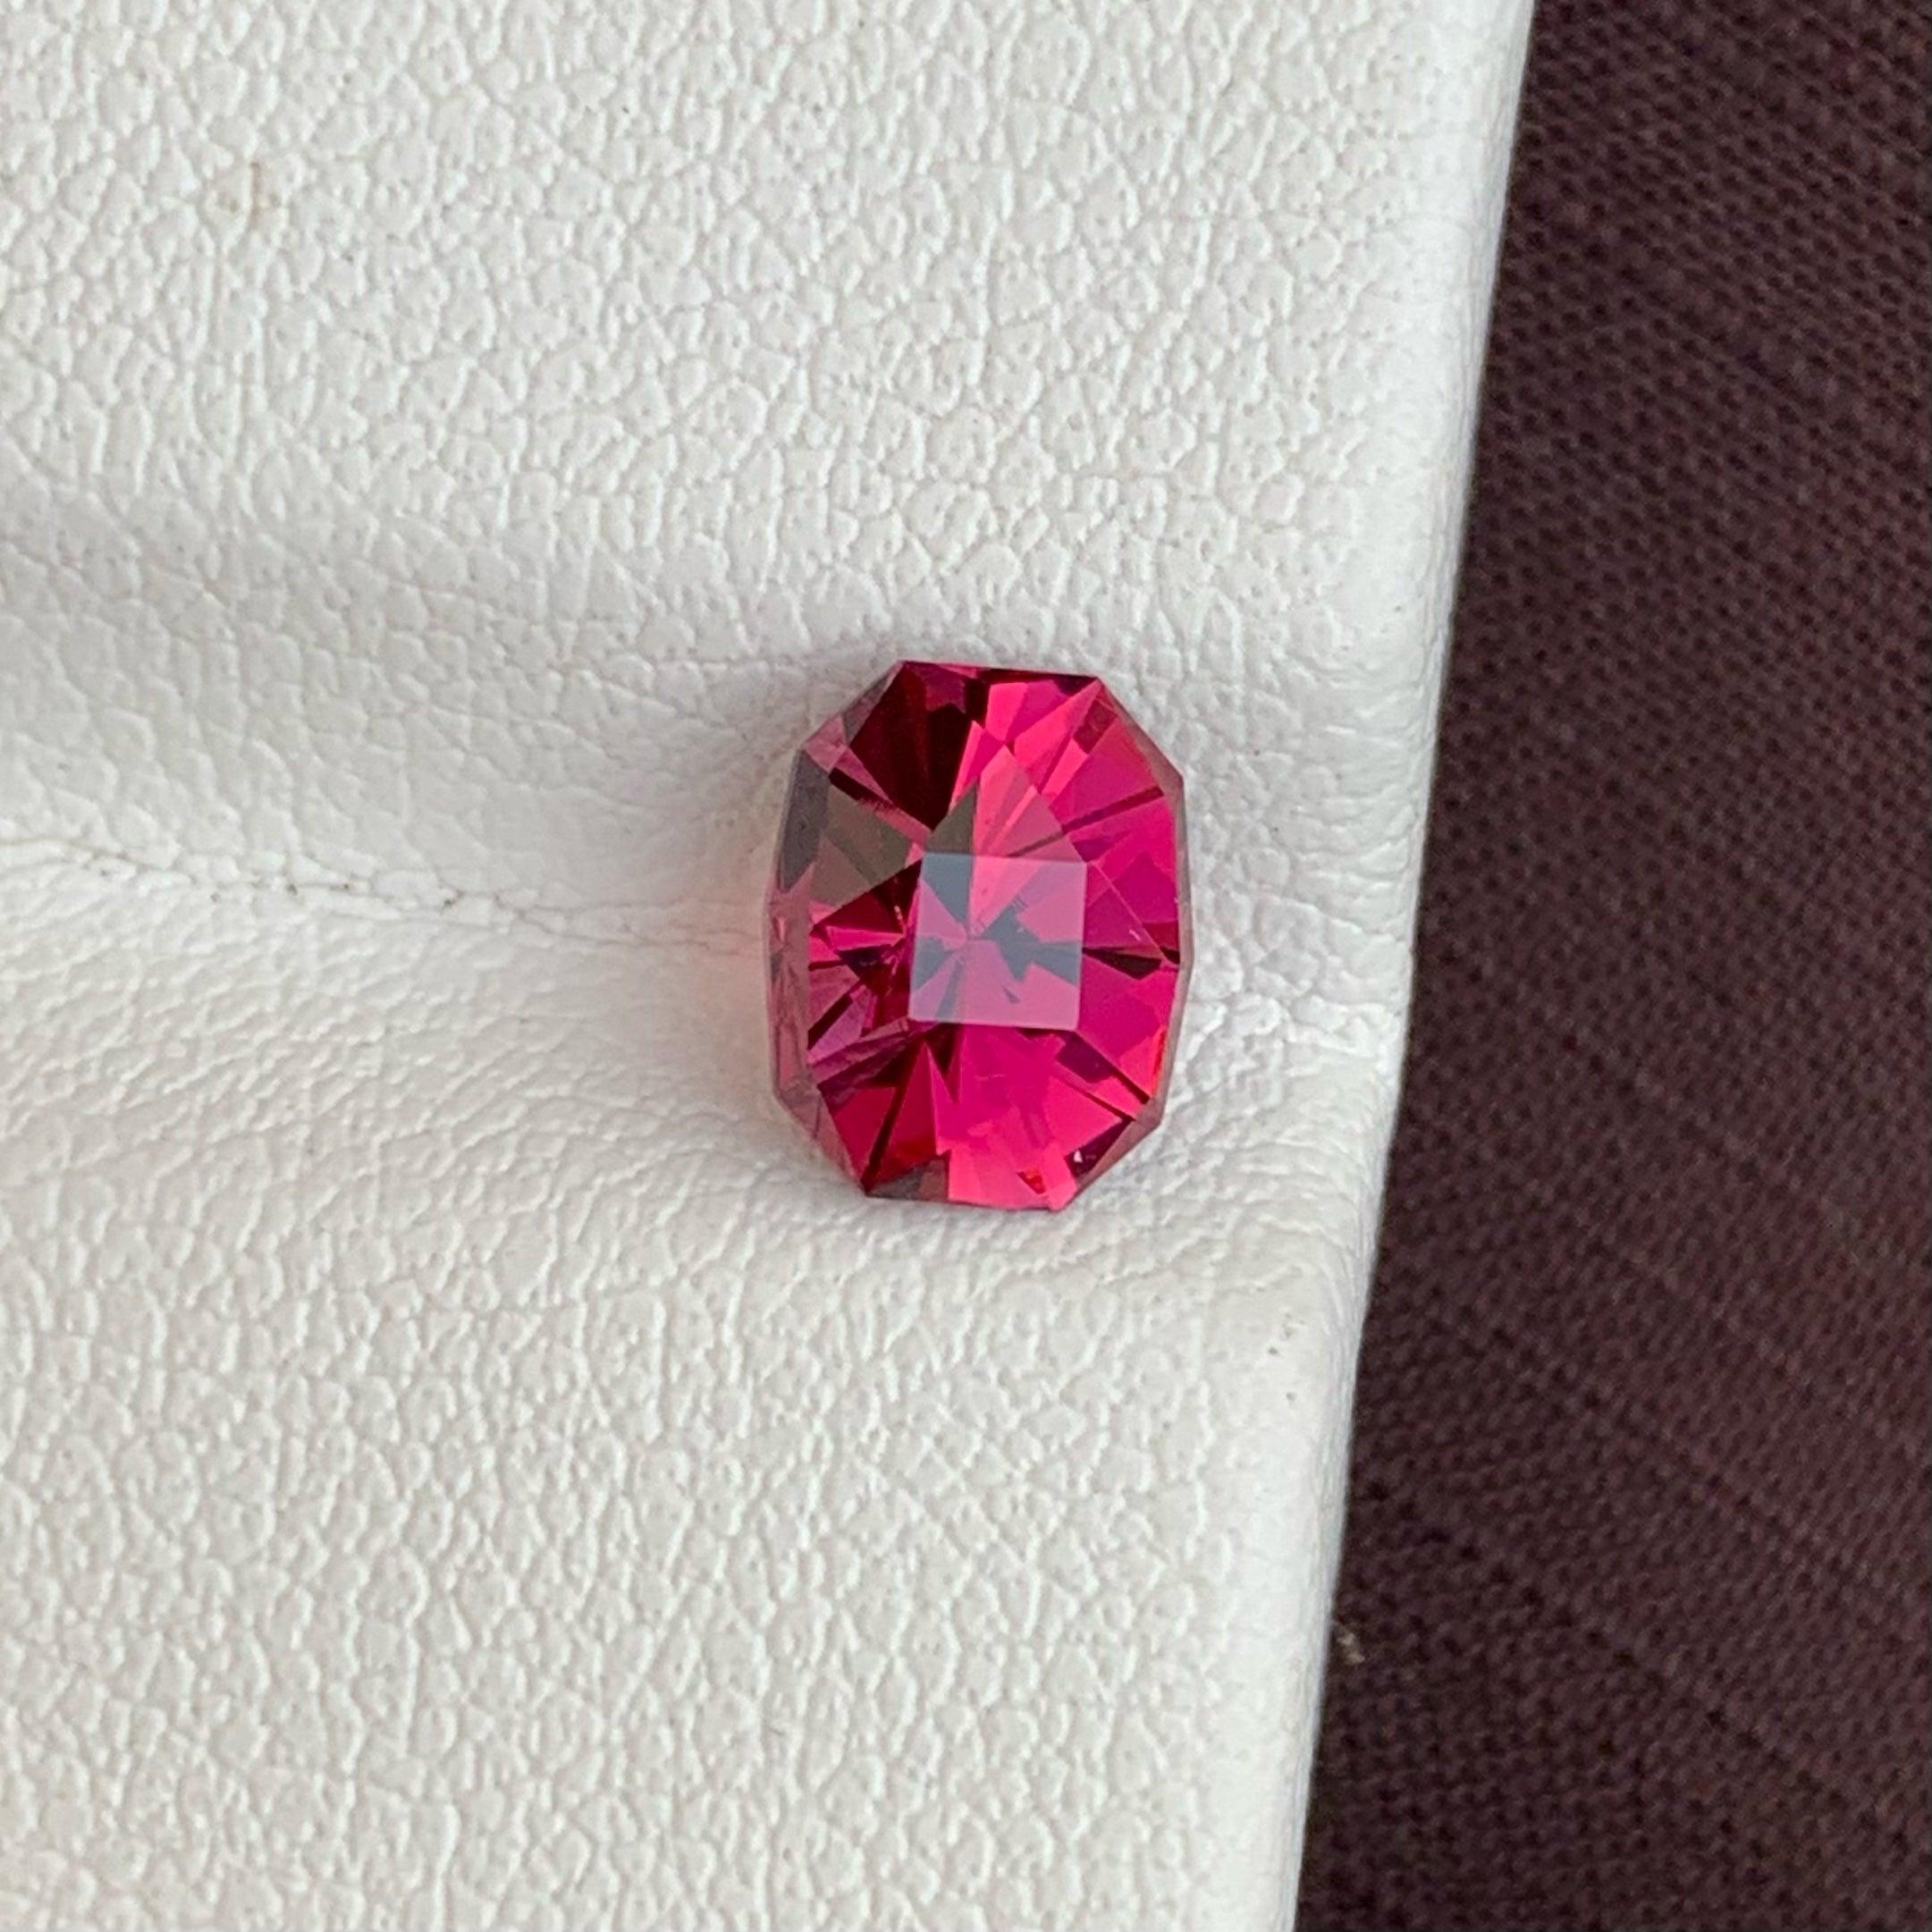 Fantastic Natural Pinkish Red Garnet Gemstone, available for sale at wholesale price, natural high quality, 1.70 carats loose garnet gemstone from Malawi.
Product Information:
GEMSTONE NAME: Fantastic Natural Pinkish Red Garnet Gemstone
WEIGHT: 1.70